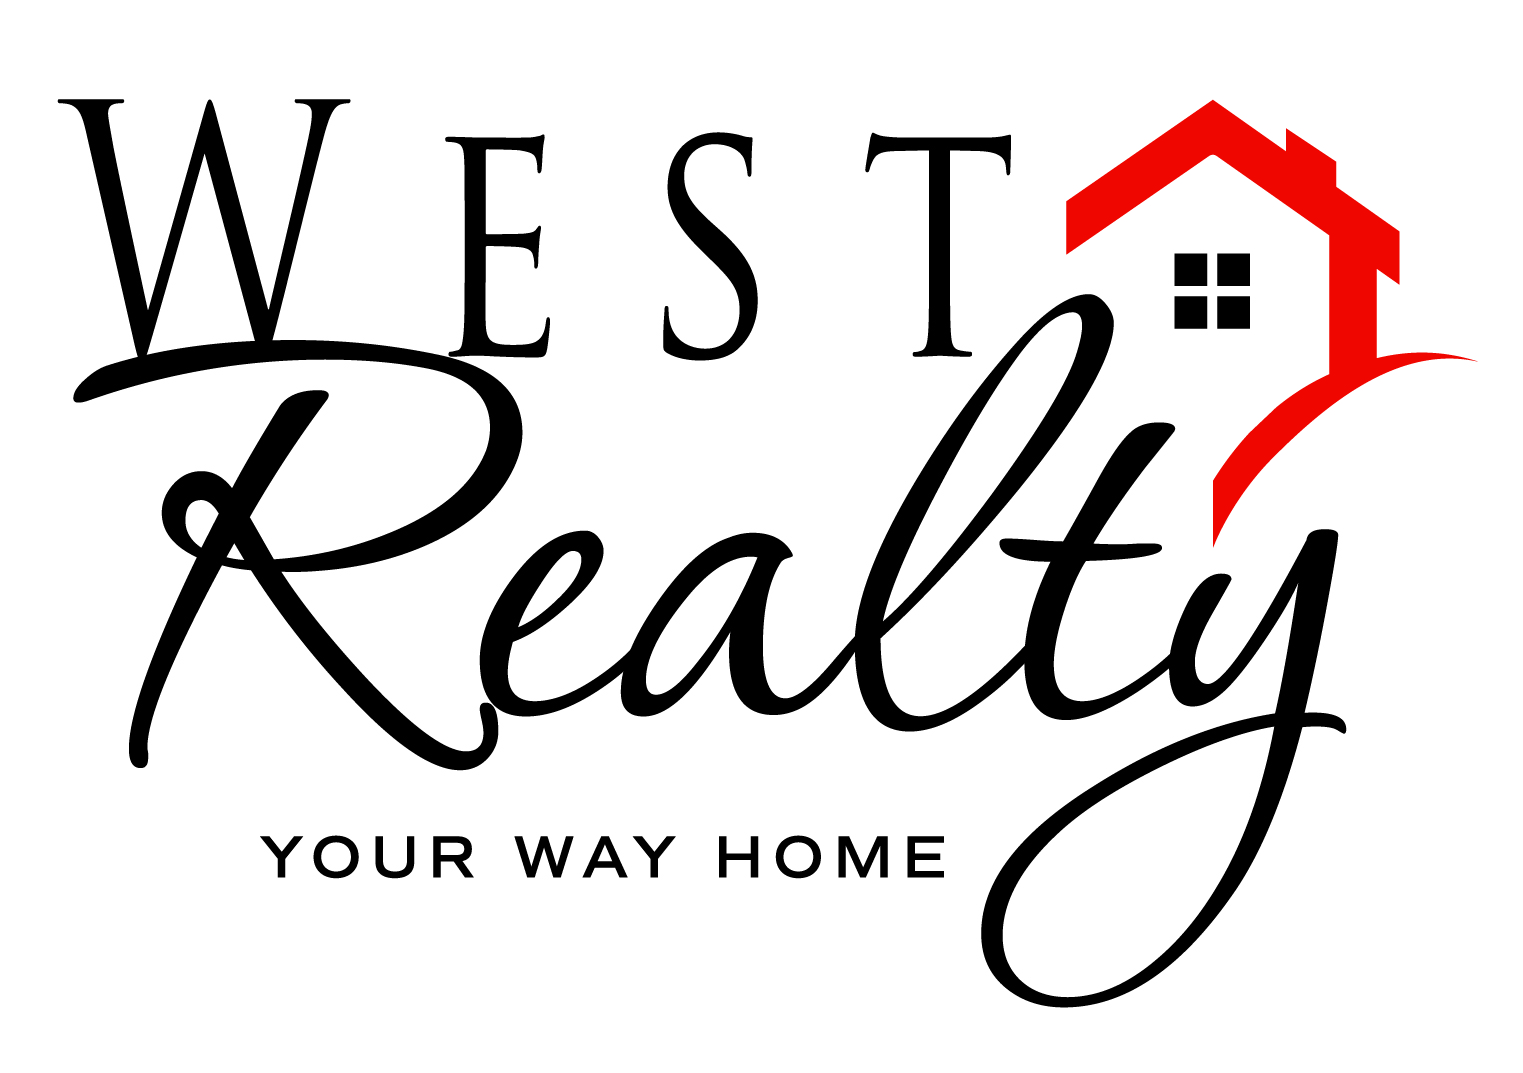 West realty (Exhibitor)